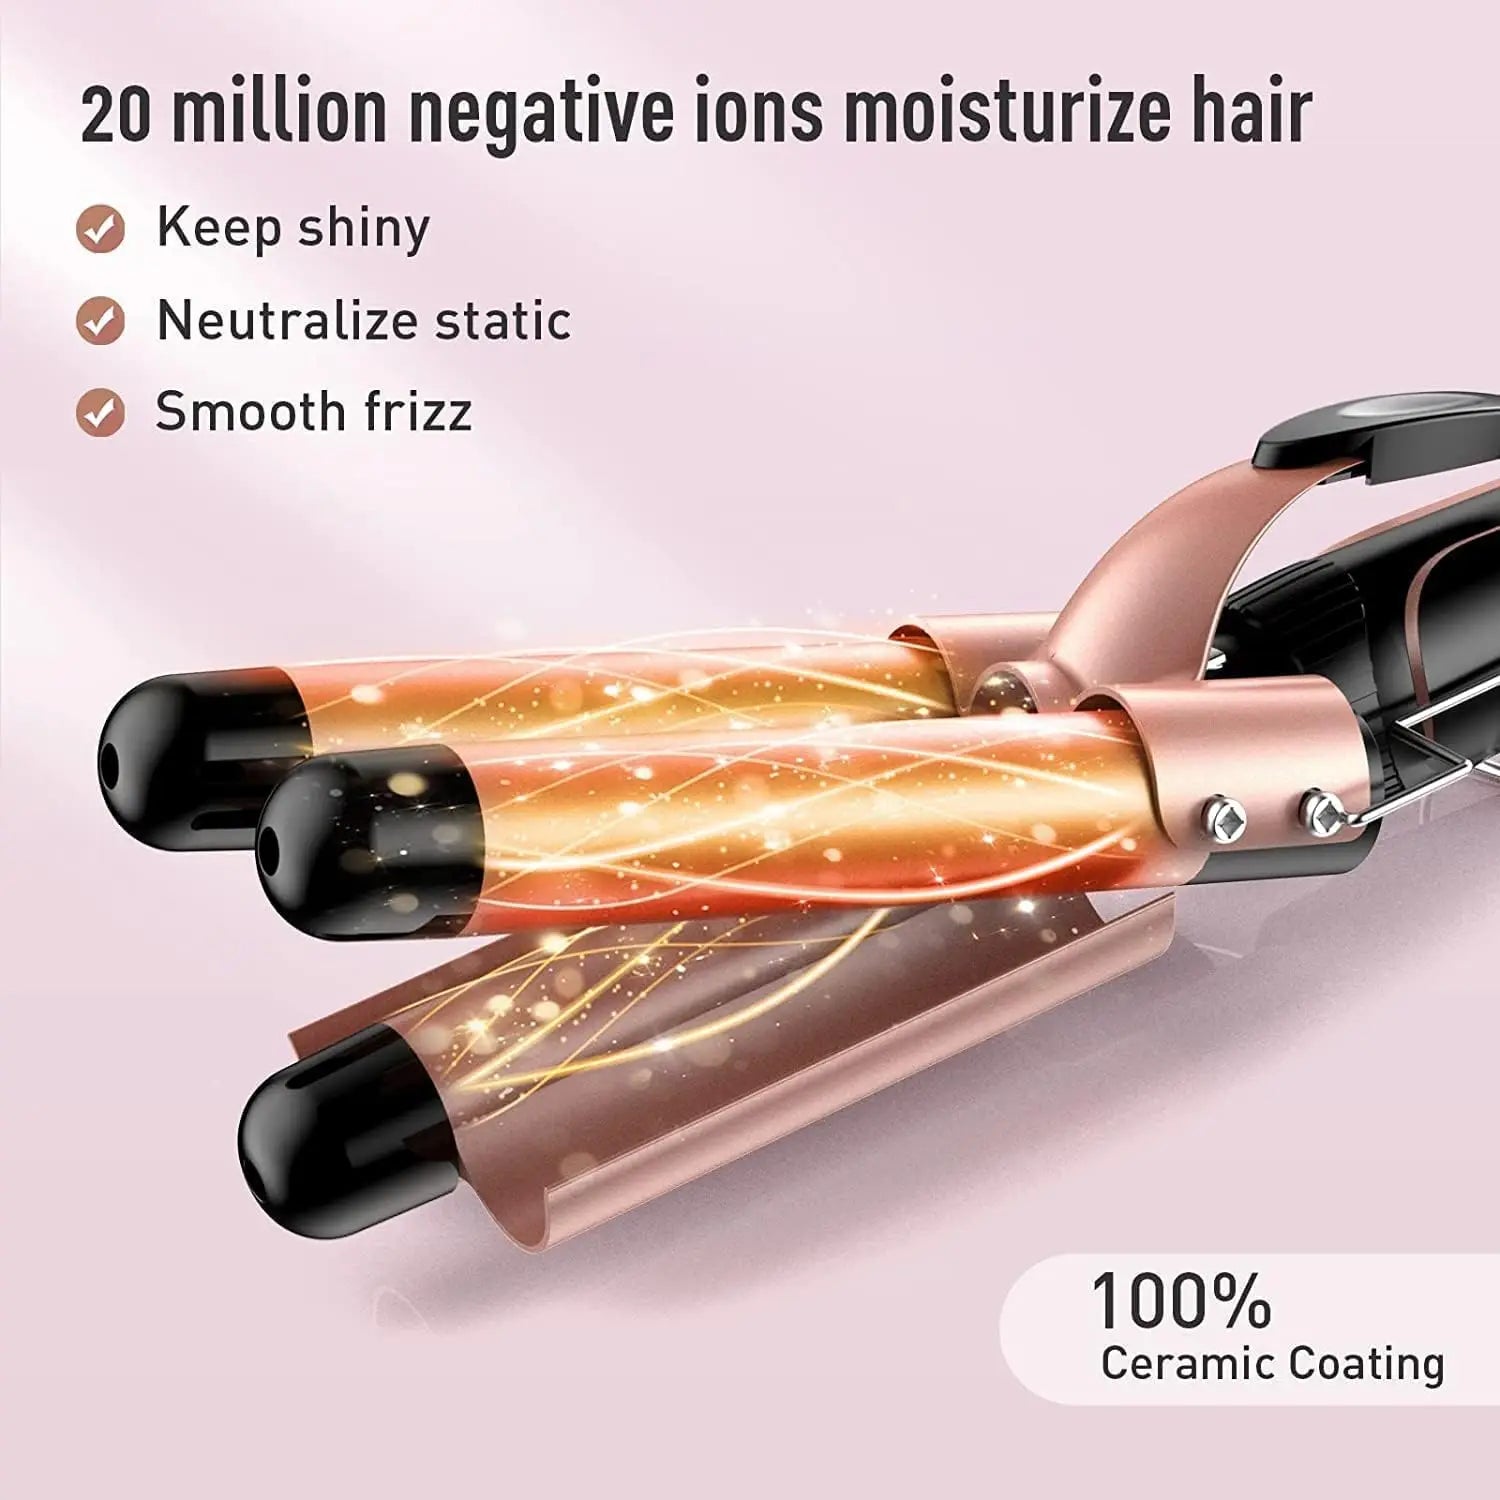 5 in 1 Styling Iron